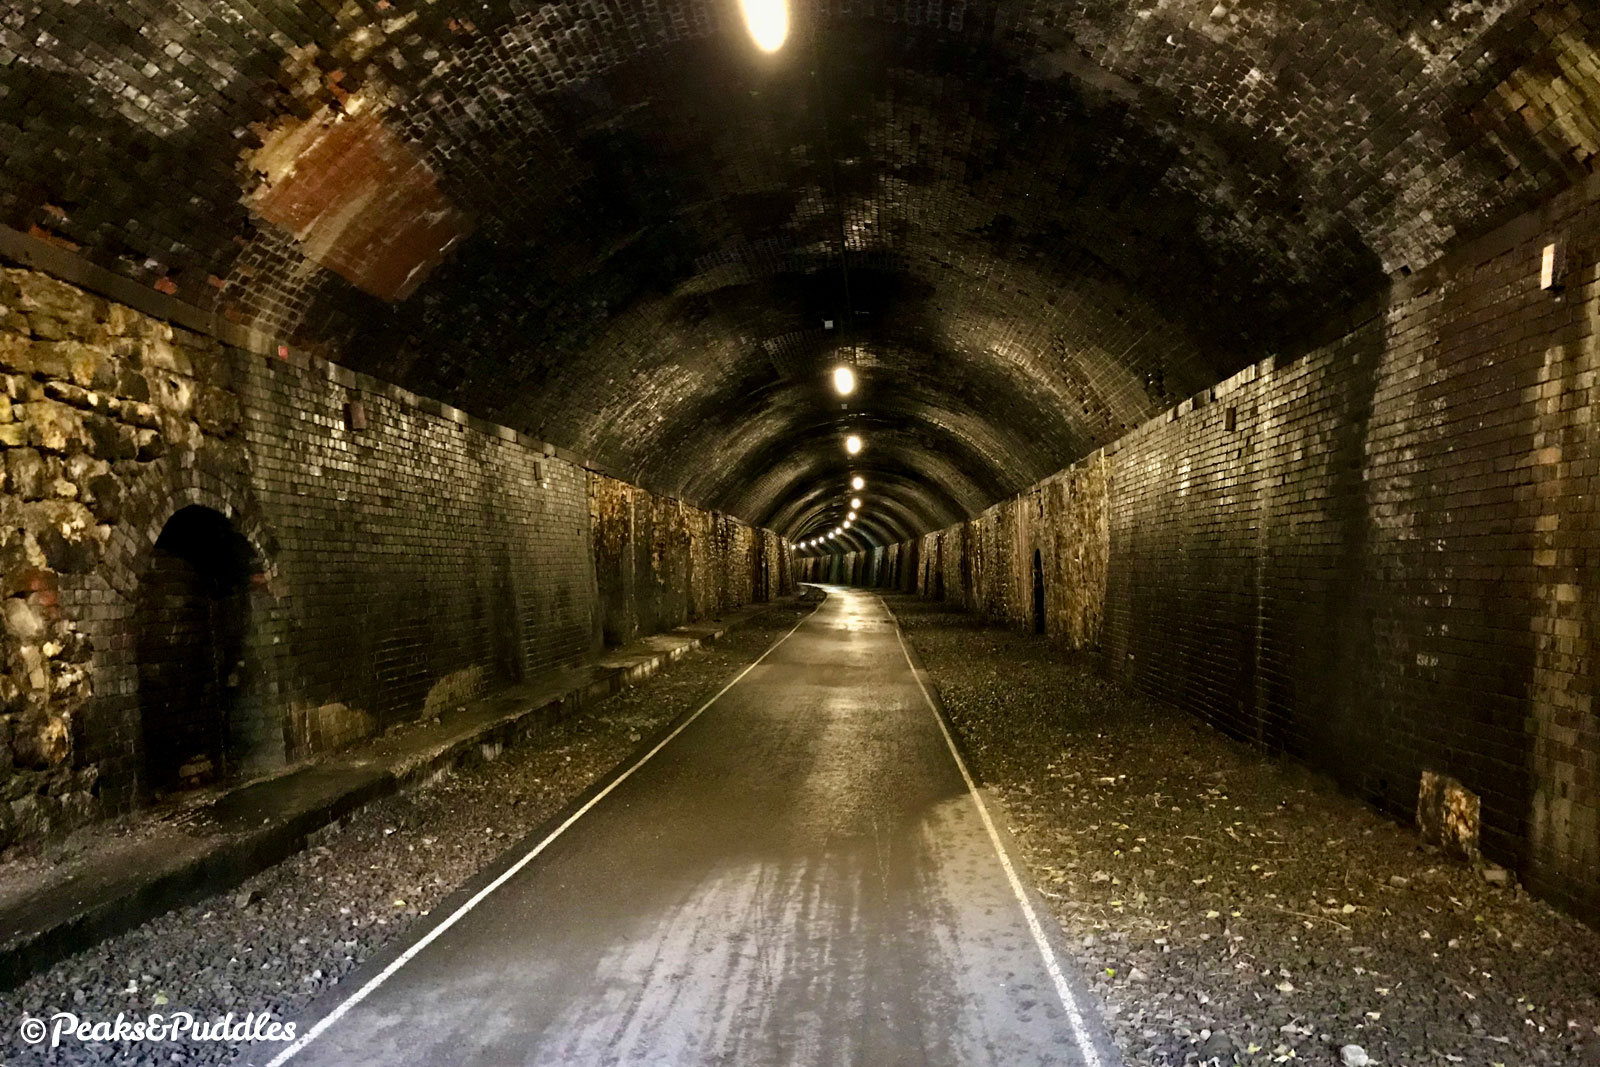 Riding a bike through the Monsal Trail tunnels is a truly unforgettable experience, one of the cycling highlights of Great Britain, let alone the Peak District.